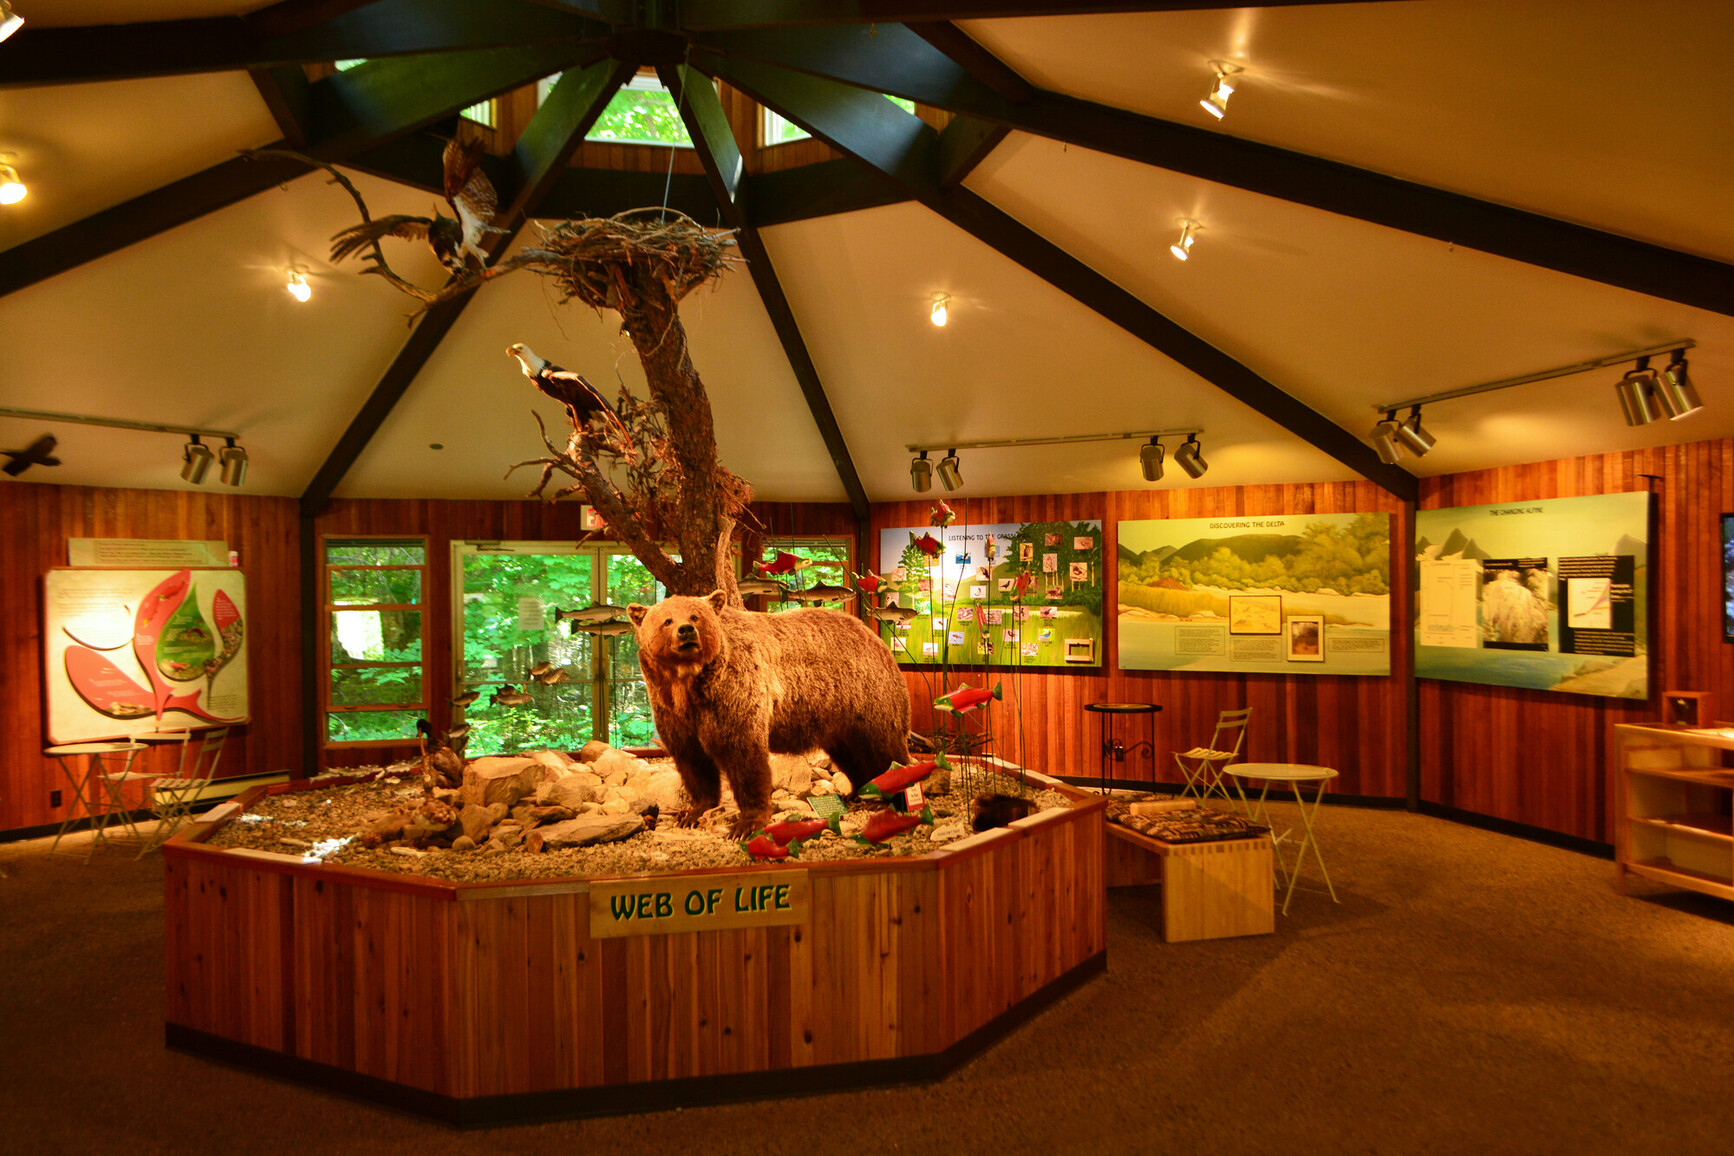 Inside visitor centre. Taxidermized bear and info graphics in centre.